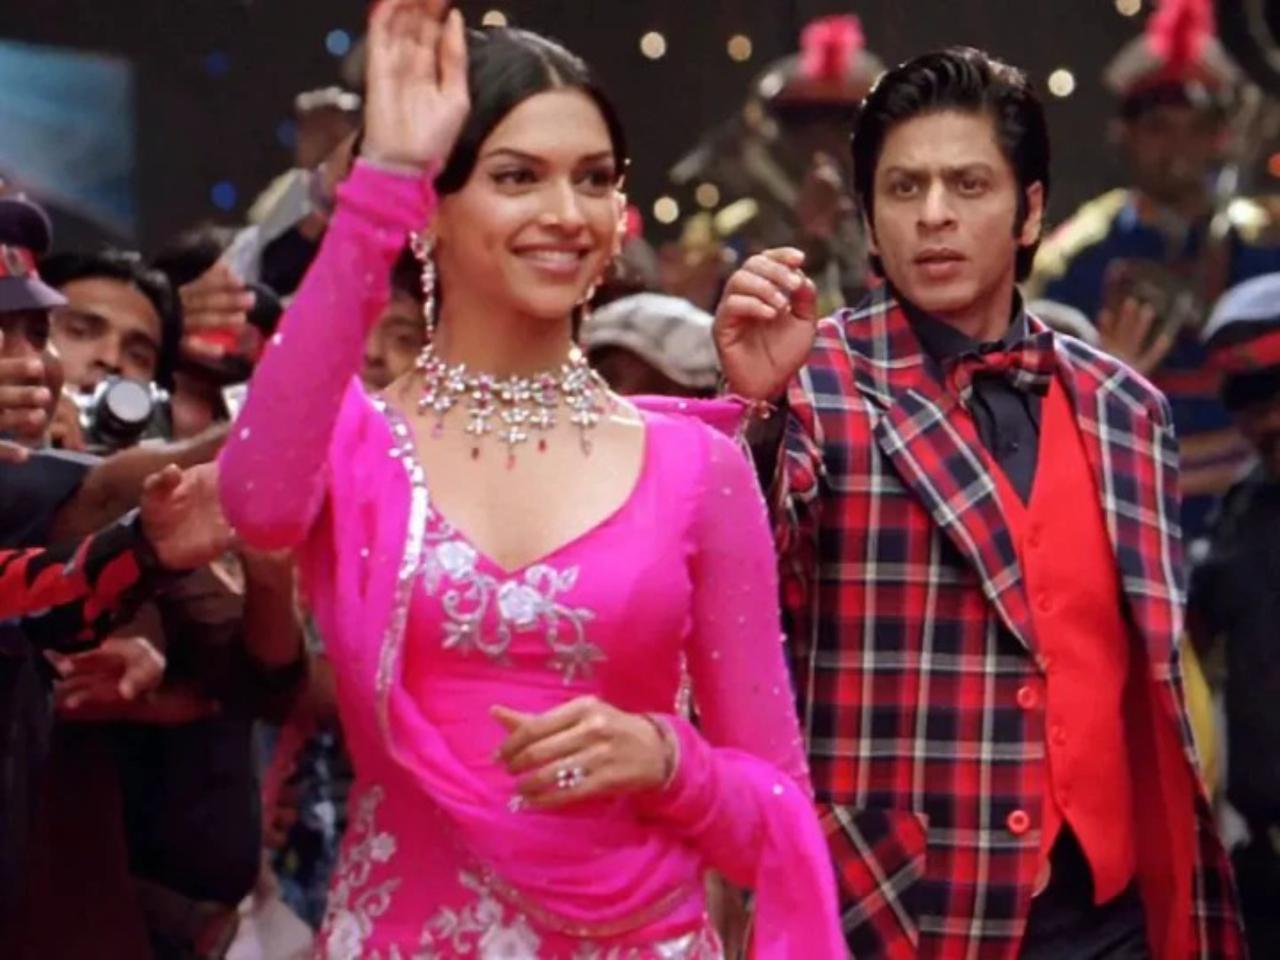 Om Shanti Om
A love that rolls over to a different lifetime. Om, a junior artist, is reborn as Om Kapoor, a superstar in his second life only to avenge the murder of his lady love played by Deepika Padukone. With stellar music and an engaging plotline, this is one of Khan's best romantic films